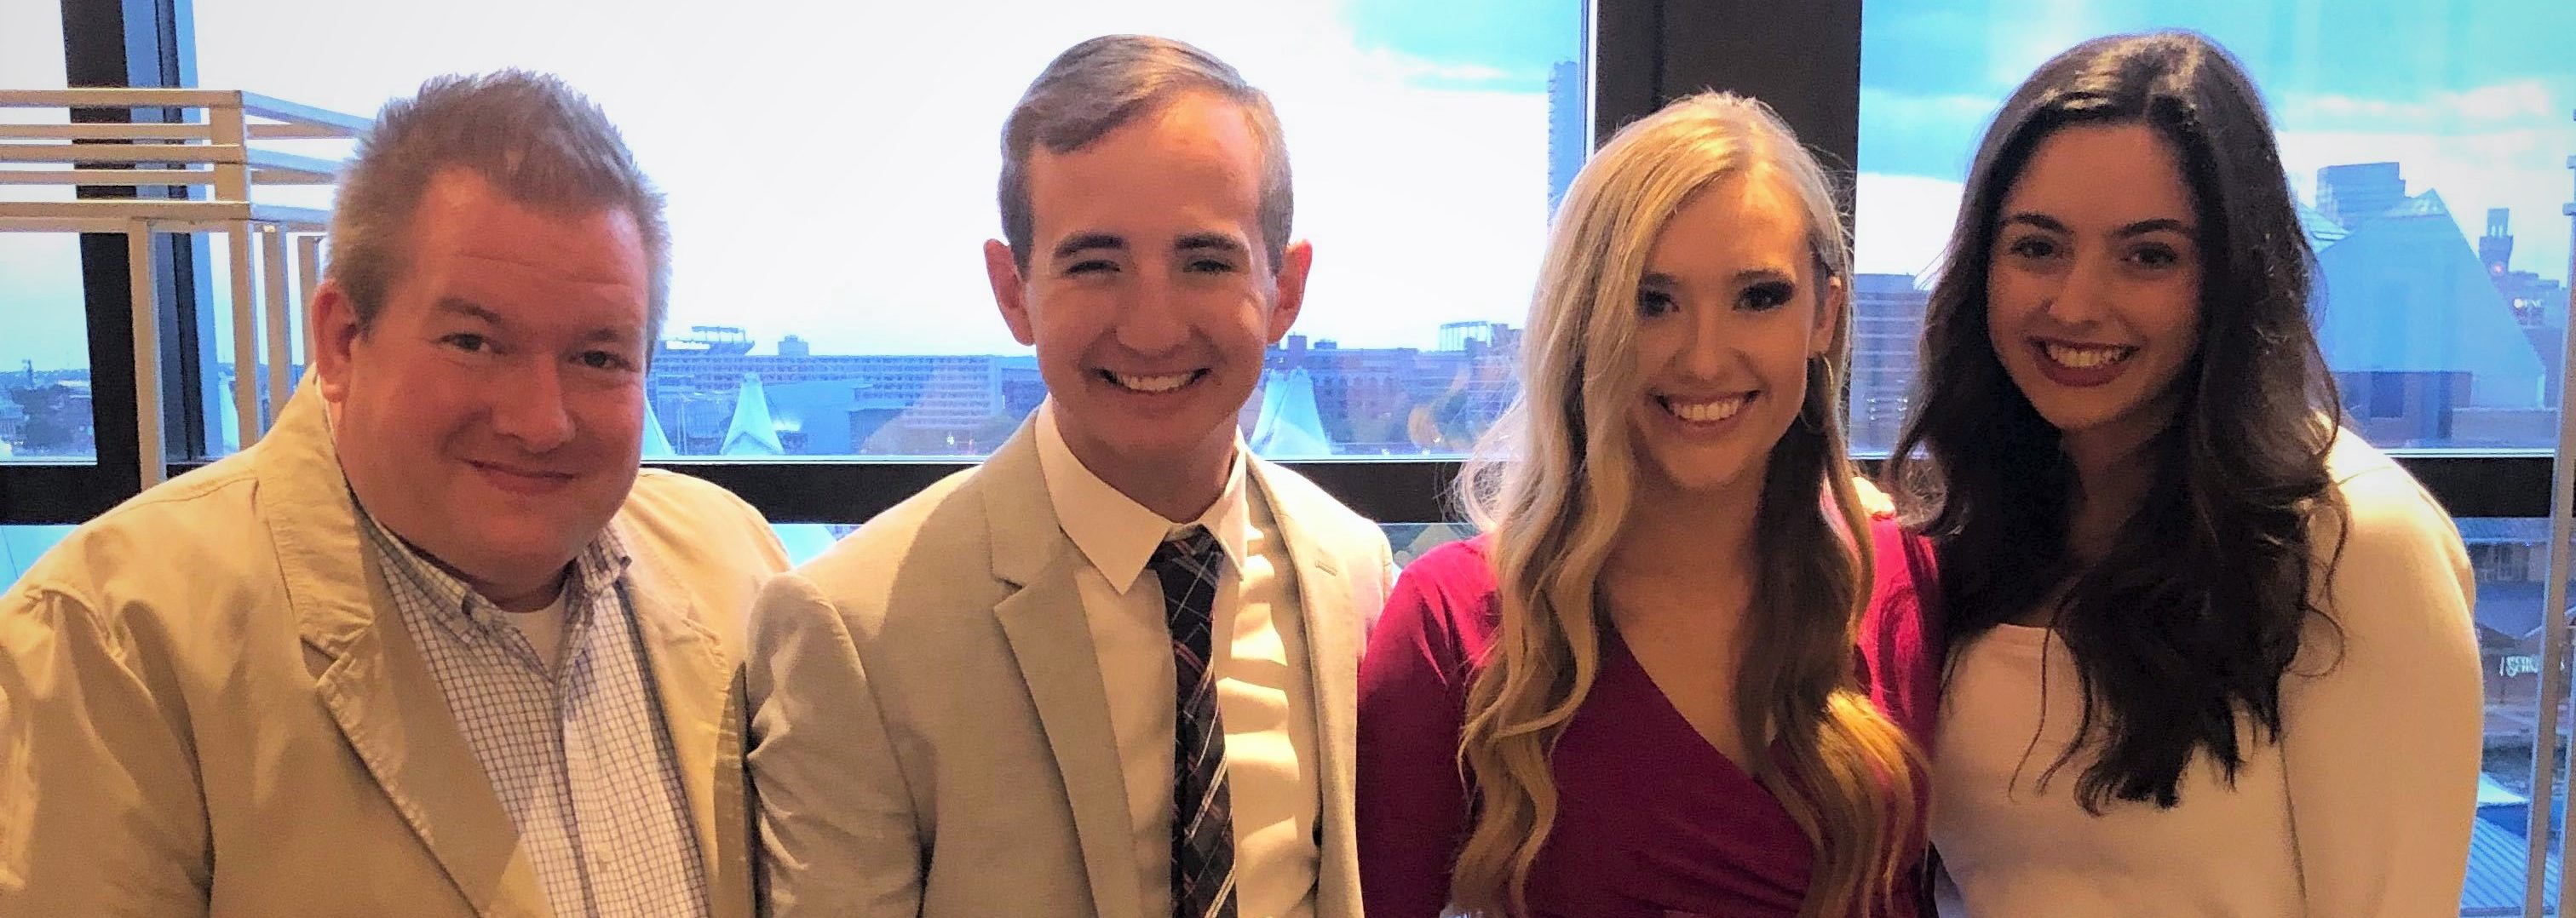 The Ouachita Student Foundation (OSF) earned the recognition of Outstanding Student Advancement Organization at the 2019 CASE ASAP national conference, held Aug. 1-3 in Baltimore. (From left) OSF director Jon Merryman and student leadership Mason Woolbright, Selby Tucker and Addy Goodman were present to accept the award.